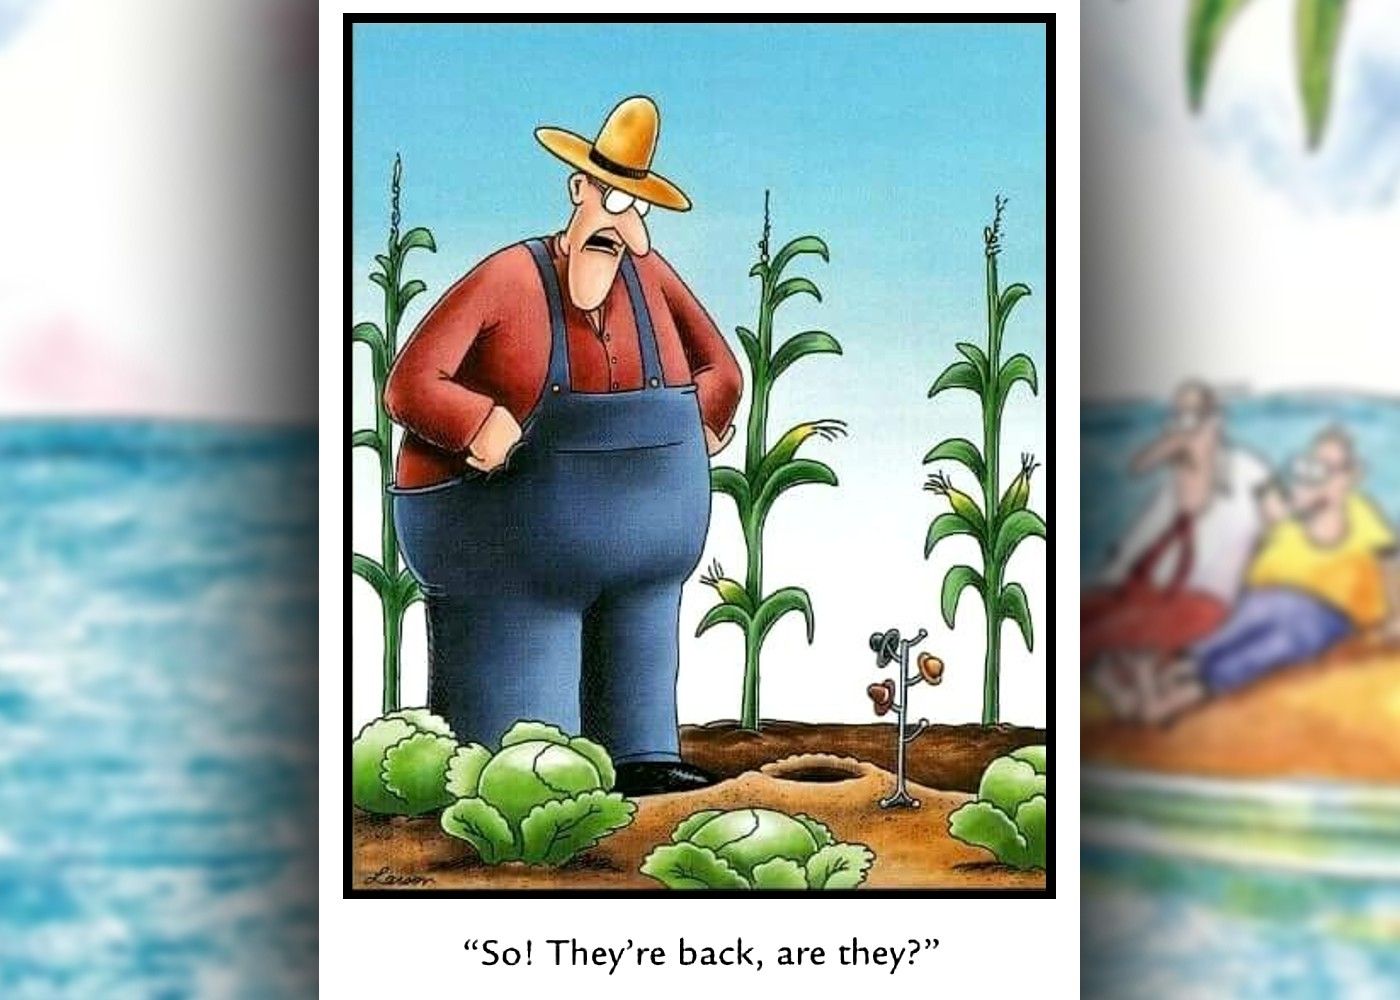 far side comic where a farmer discovers his field is infested by tiny people